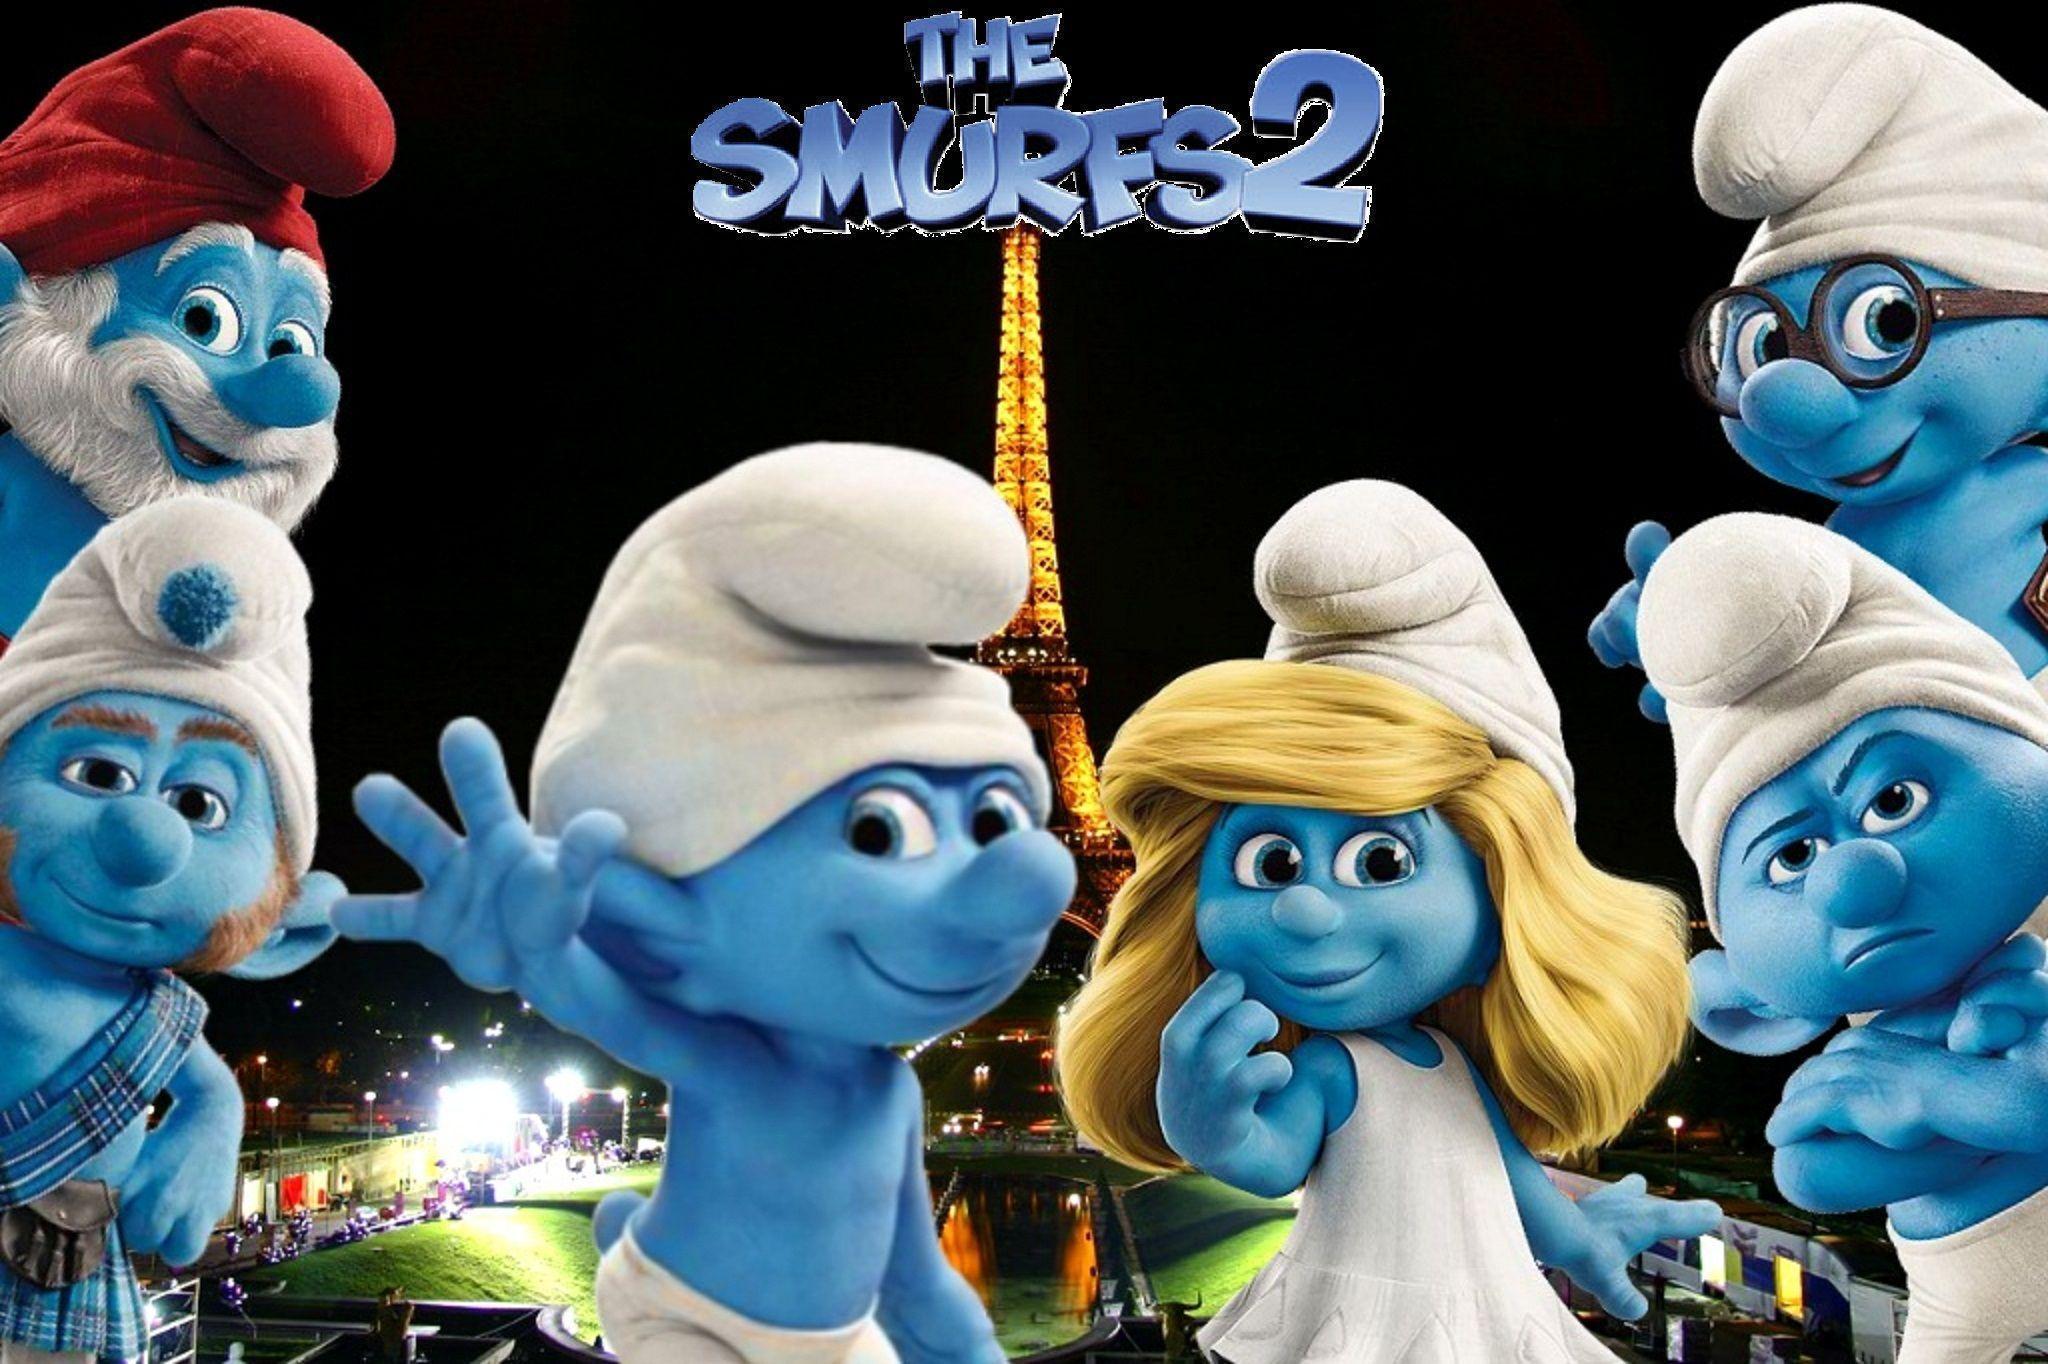 The Smurfs Wallpaper Free For iPhone